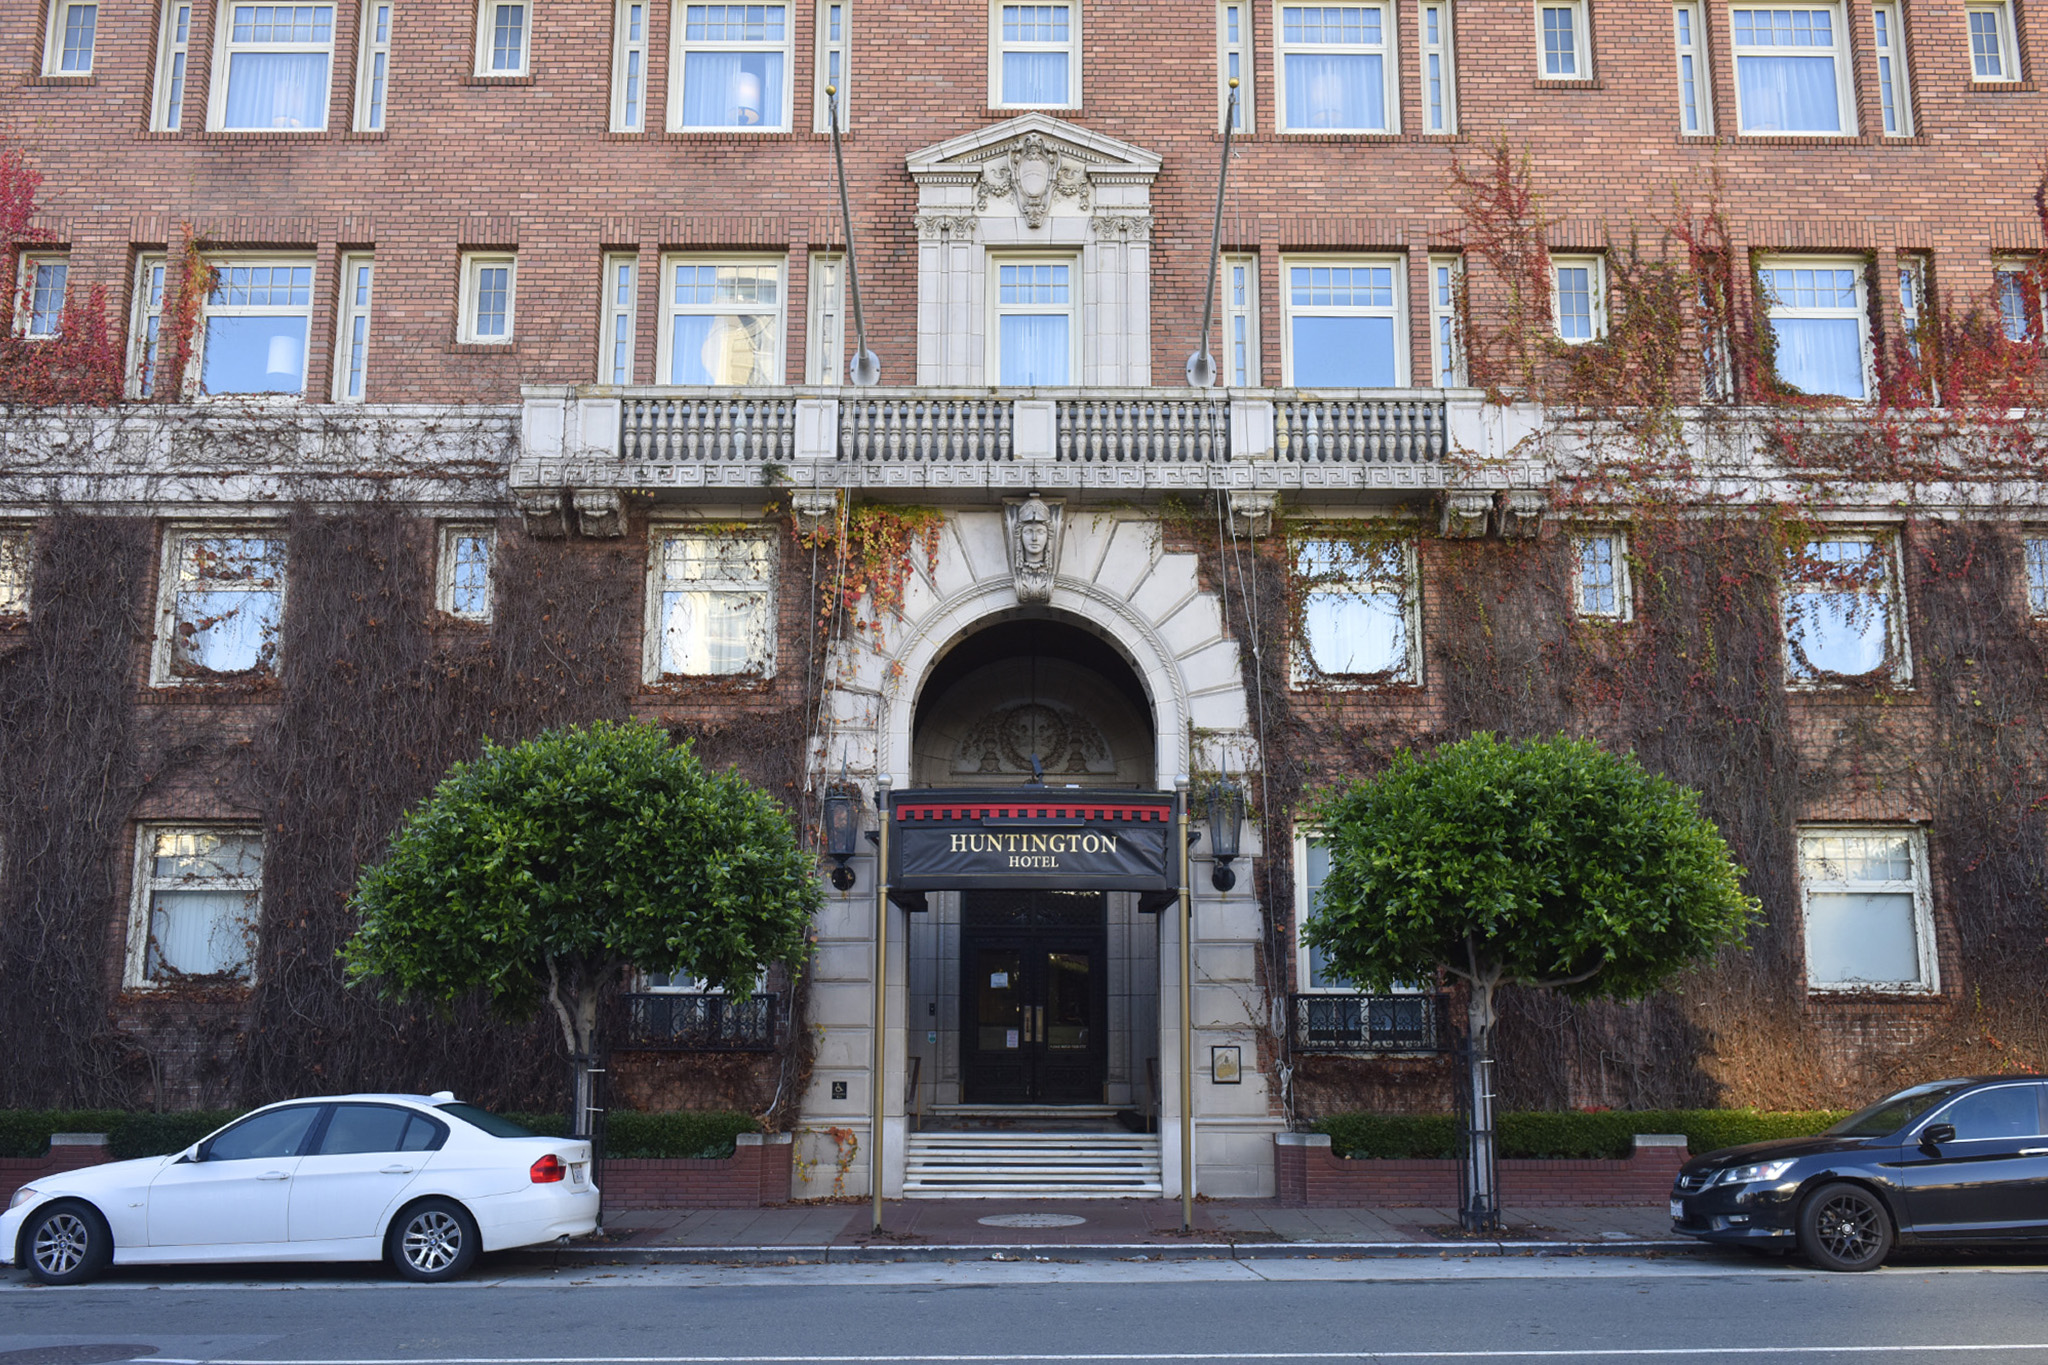 Huntington Hotel, Big 4 in SF have new owner of grand legacy